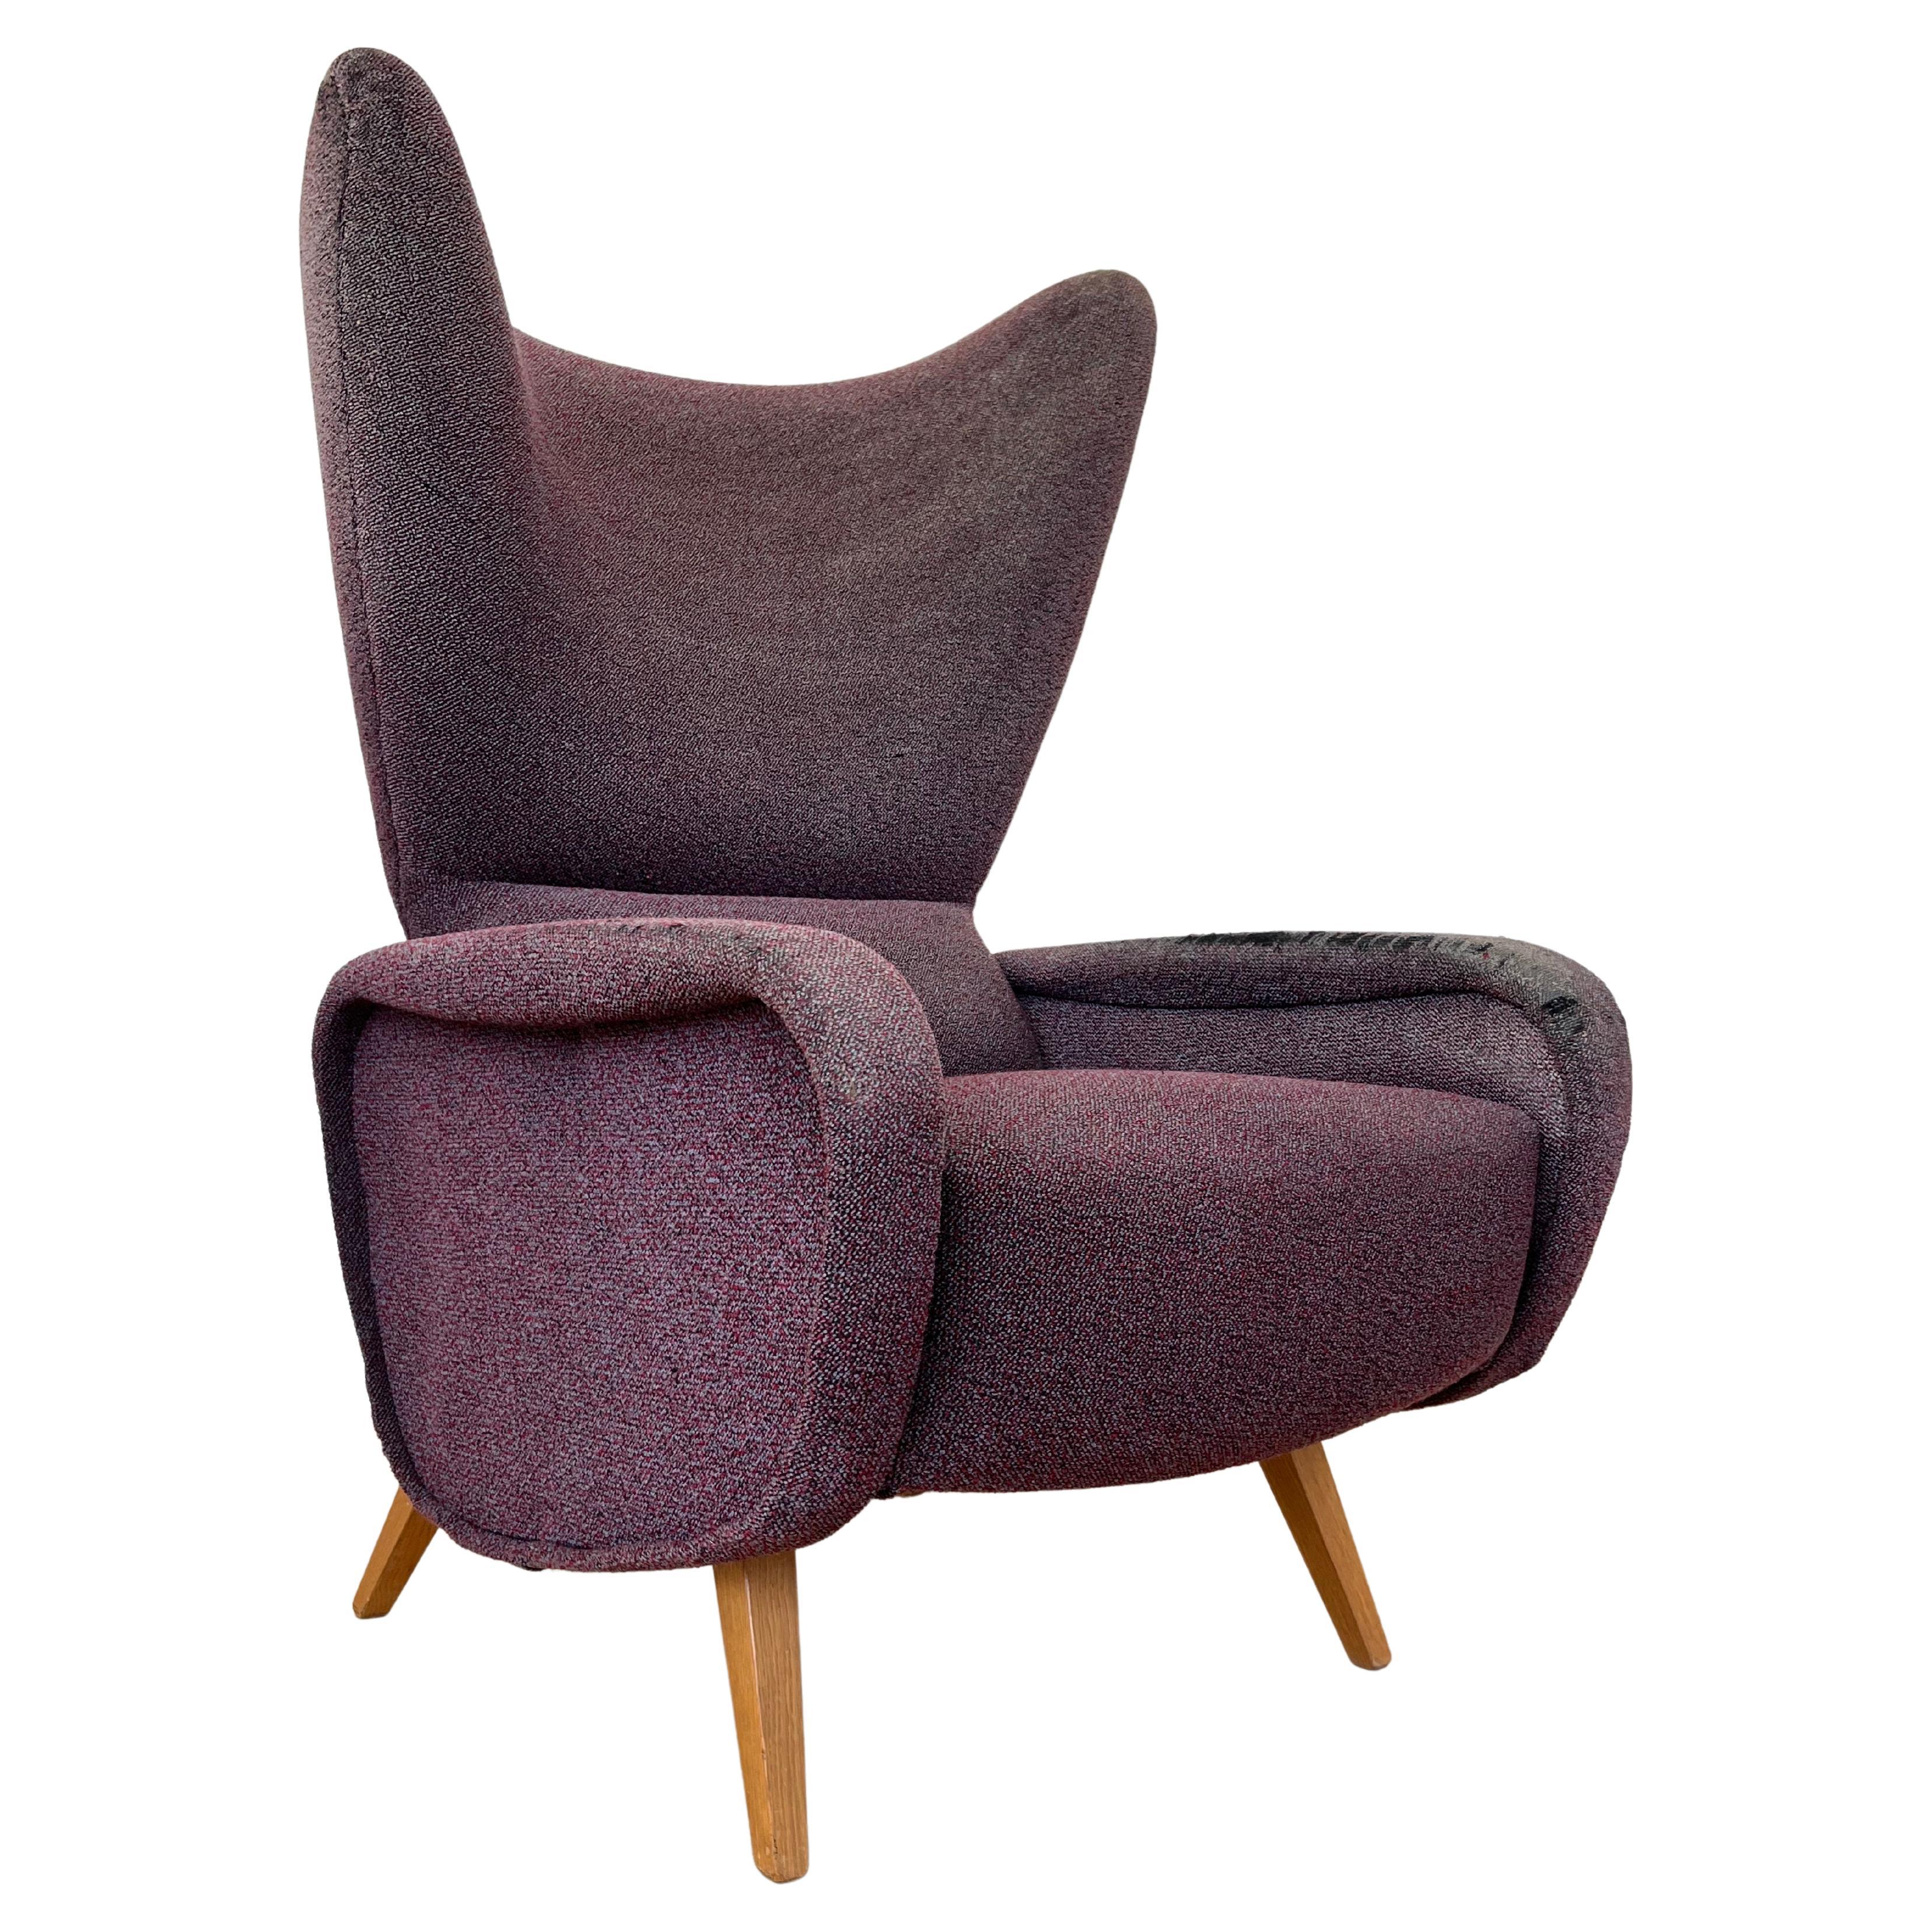 Midcentury Rare Beautiful Wing Chair Inspired by Marco Zanuso, 1970s For Sale